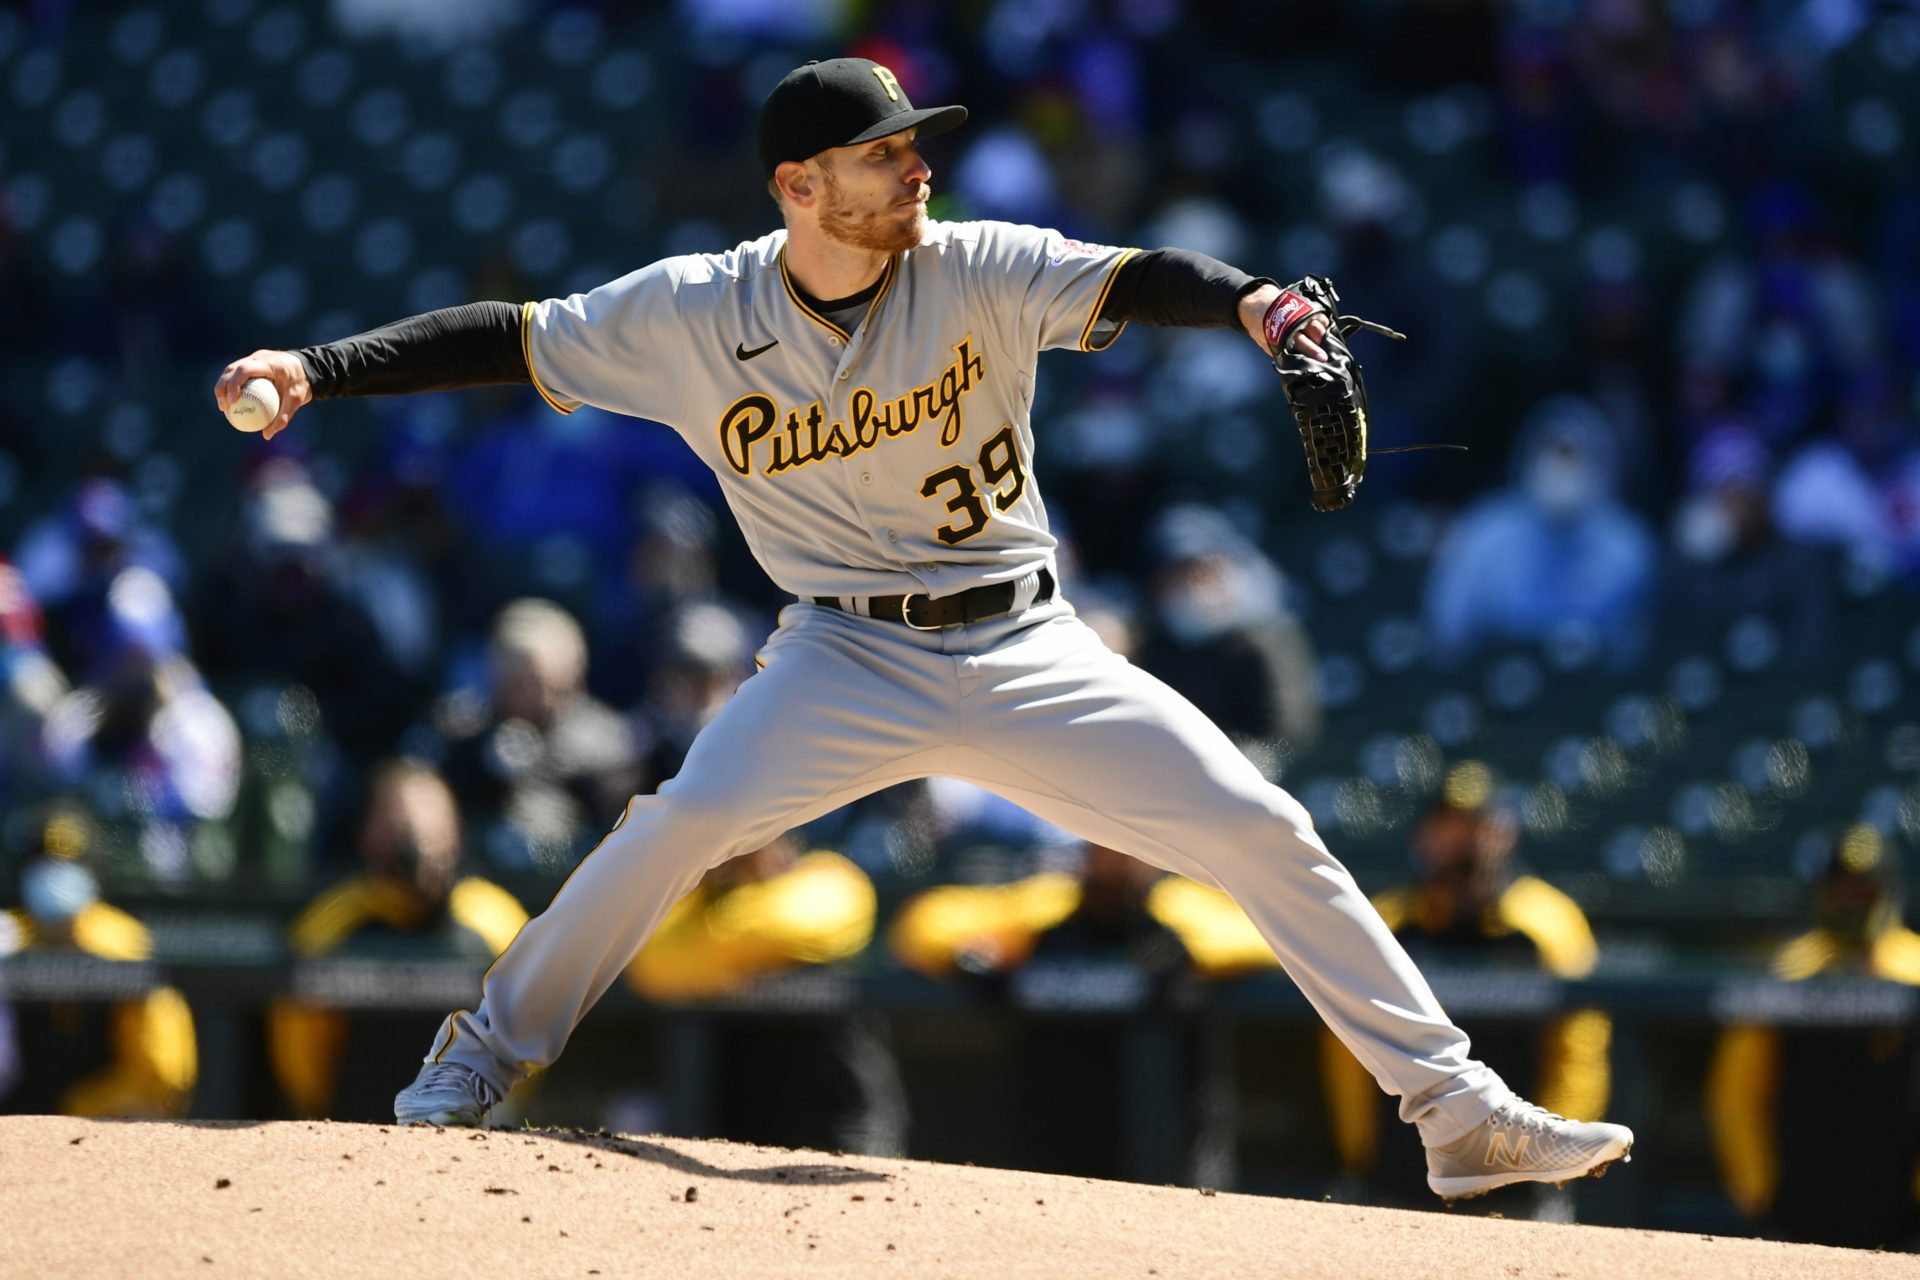 Pittsburgh Pirates starter Chad Kuhl delivers a pitch during the first inning of a baseball game against the Chicago Cubs Thursday, April 1, 2021, on opening day at Wrigley Field in Chicago.